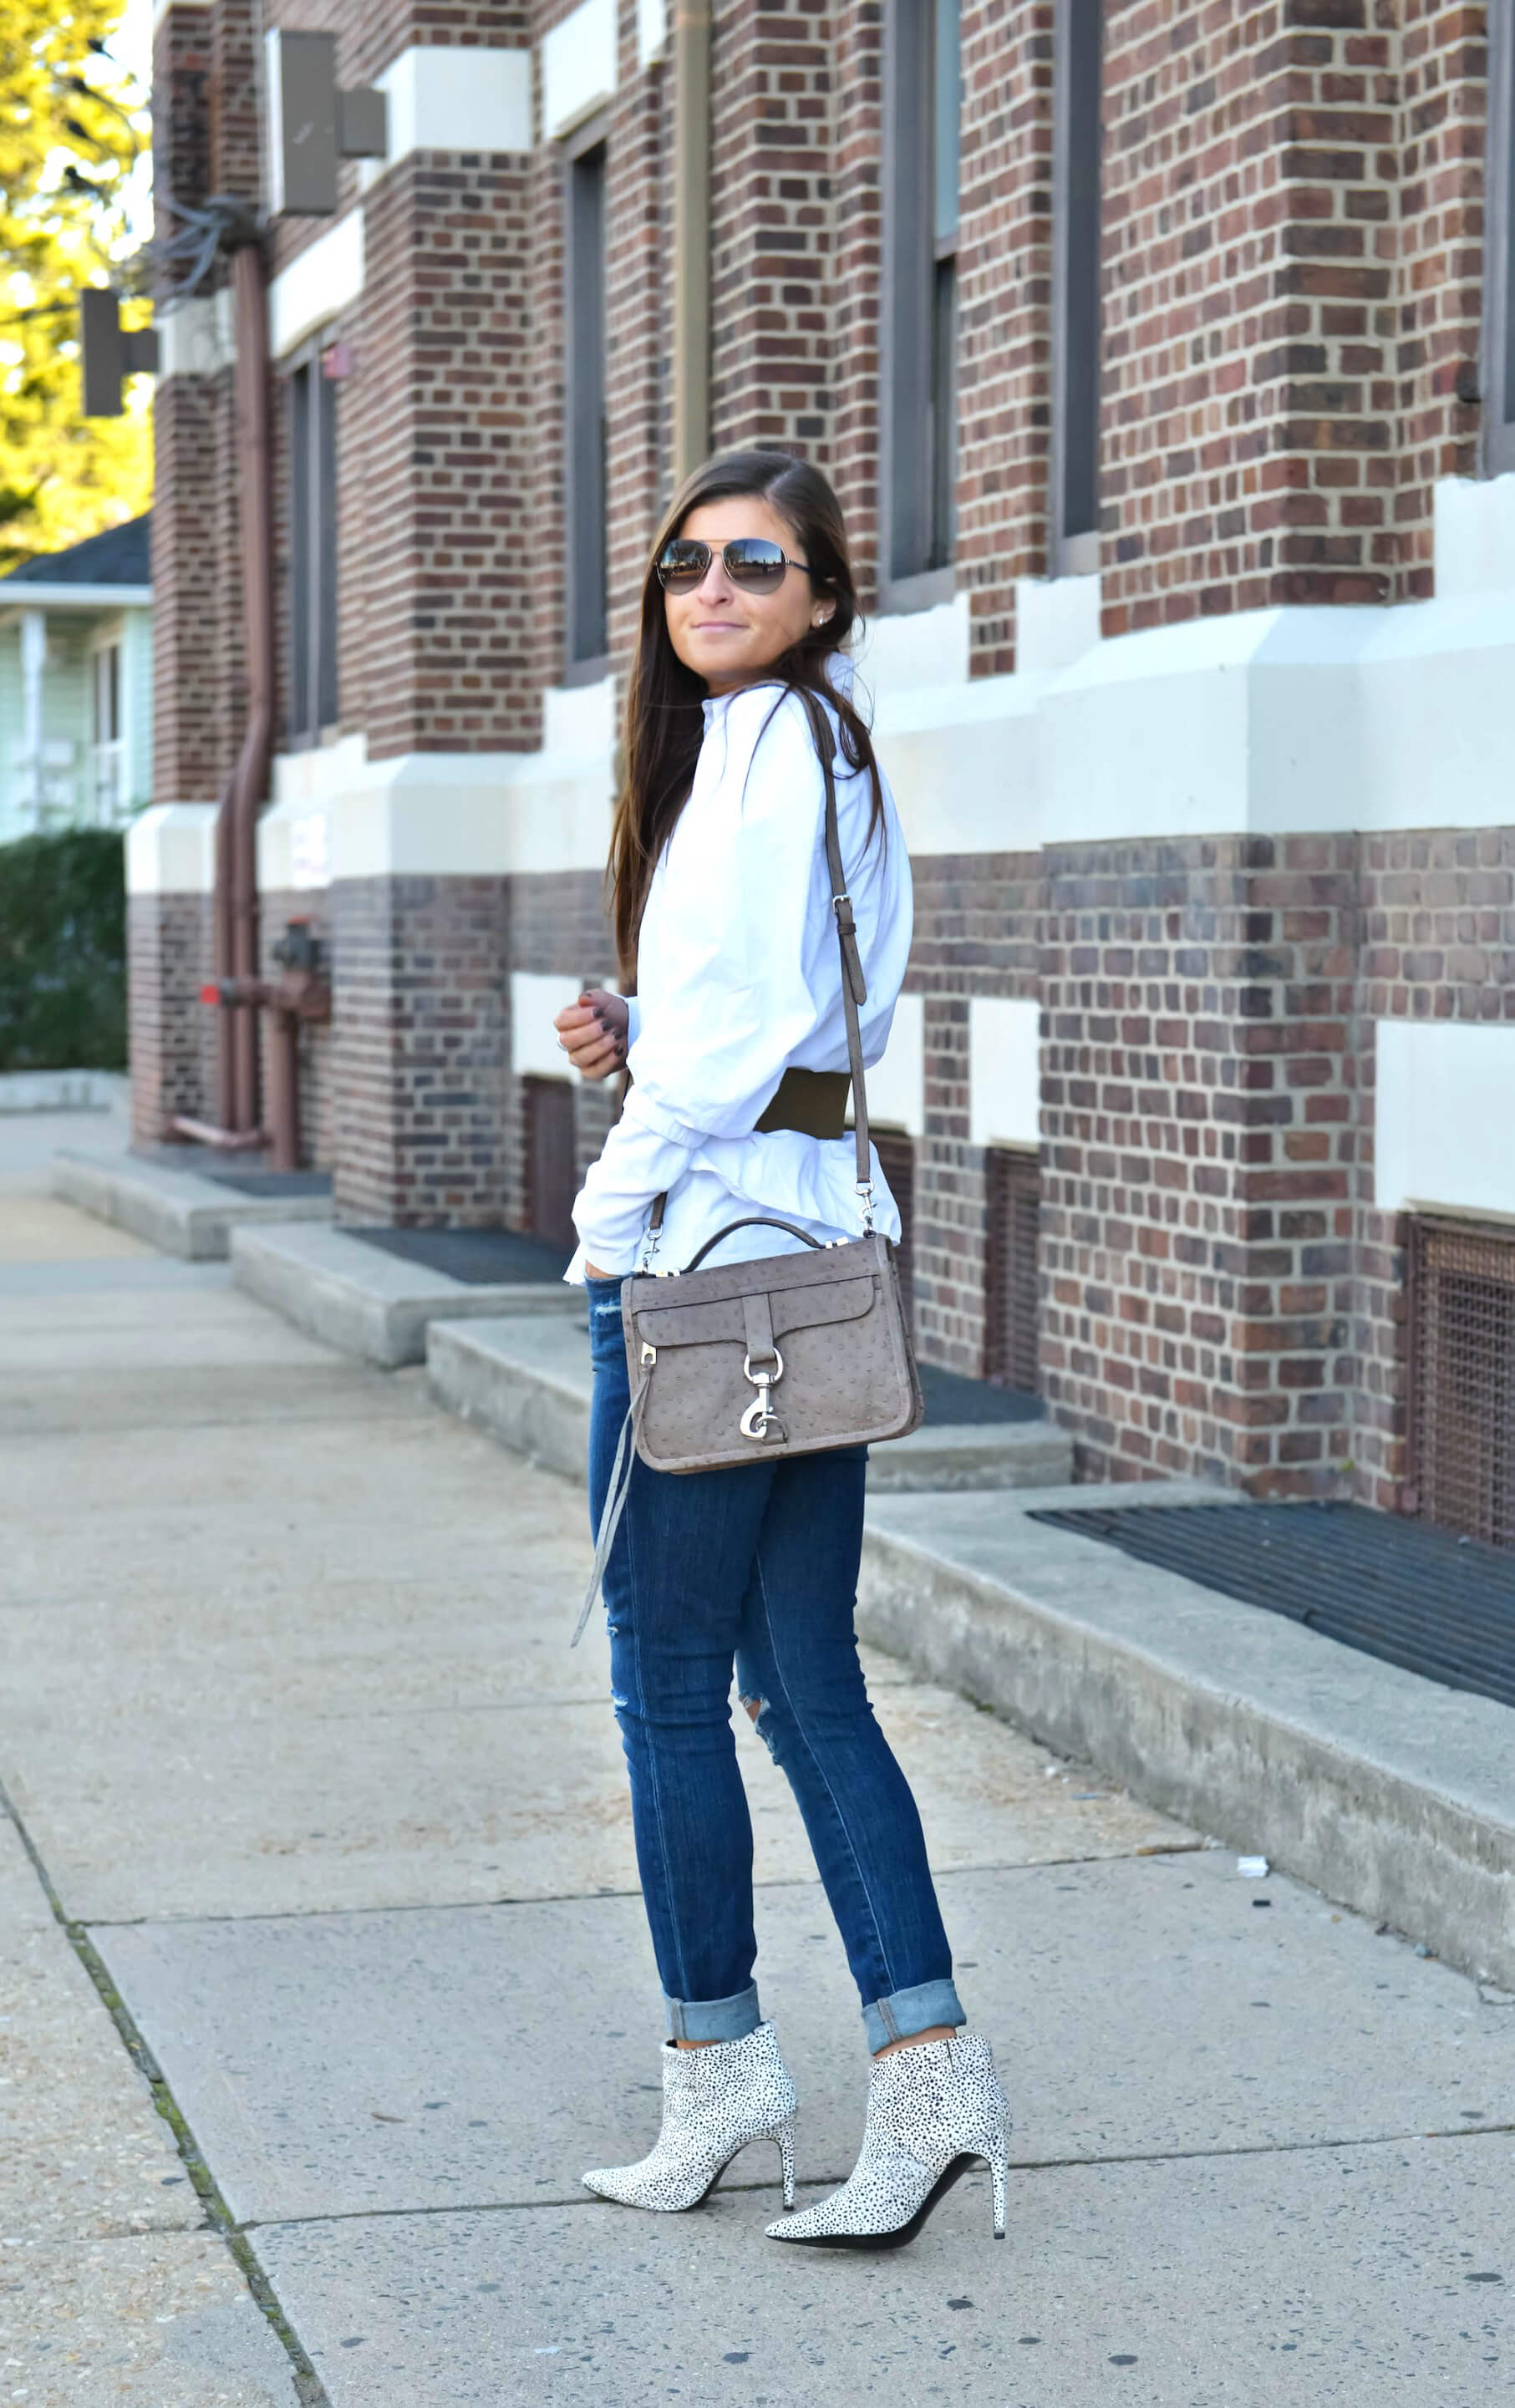 To Be Bright by Tilden Brighton - Denim & White Top Outfit, Fall Fashion